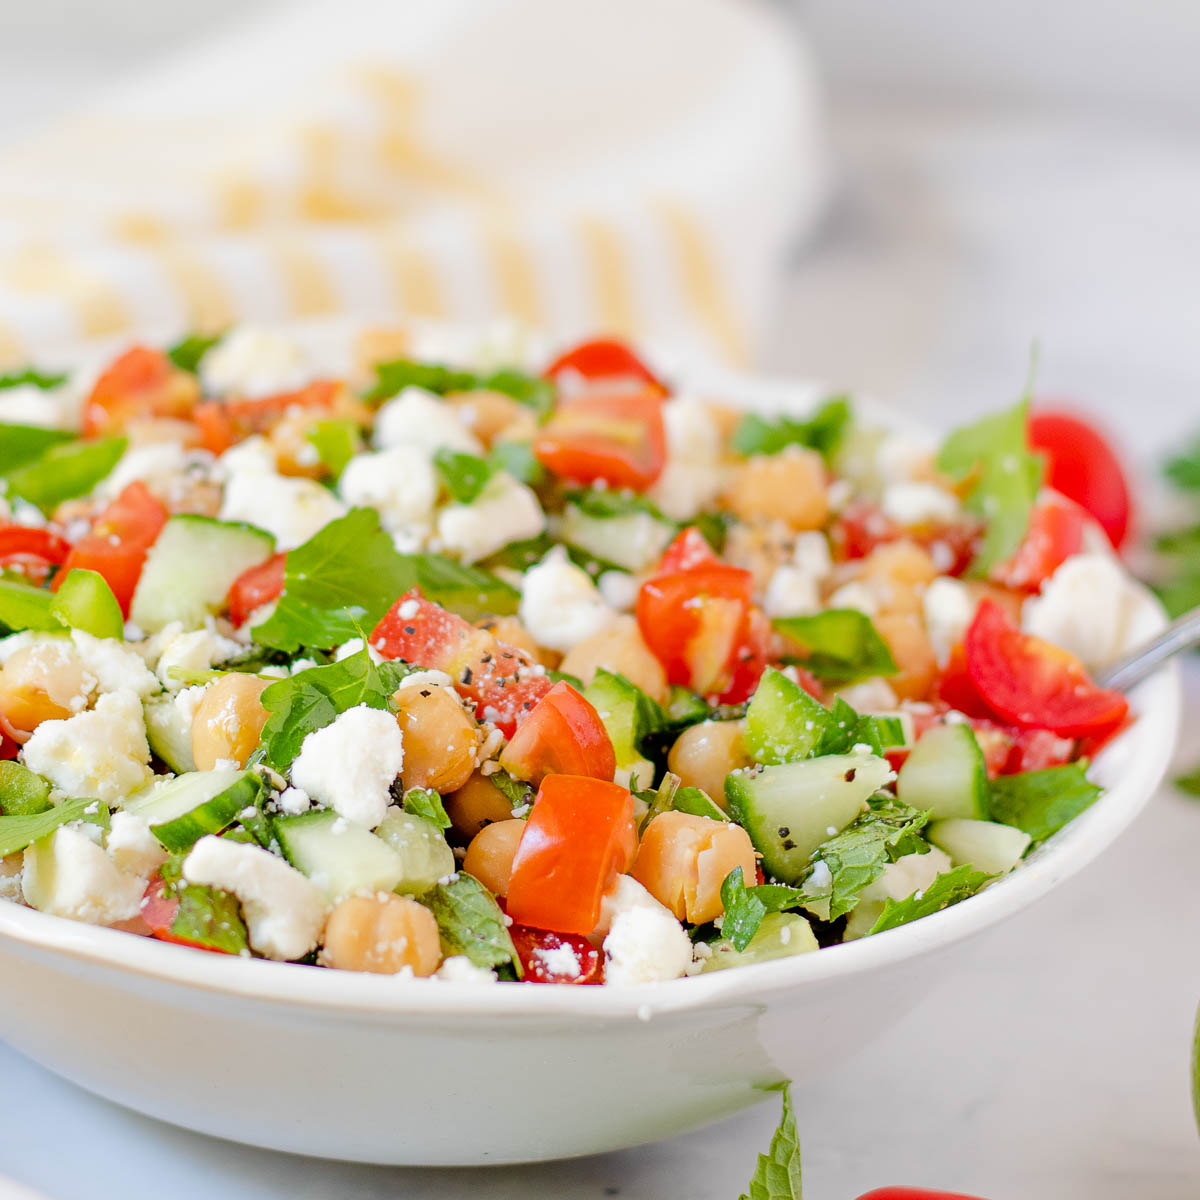 Bowl of chickpea salad with feta and veggies.